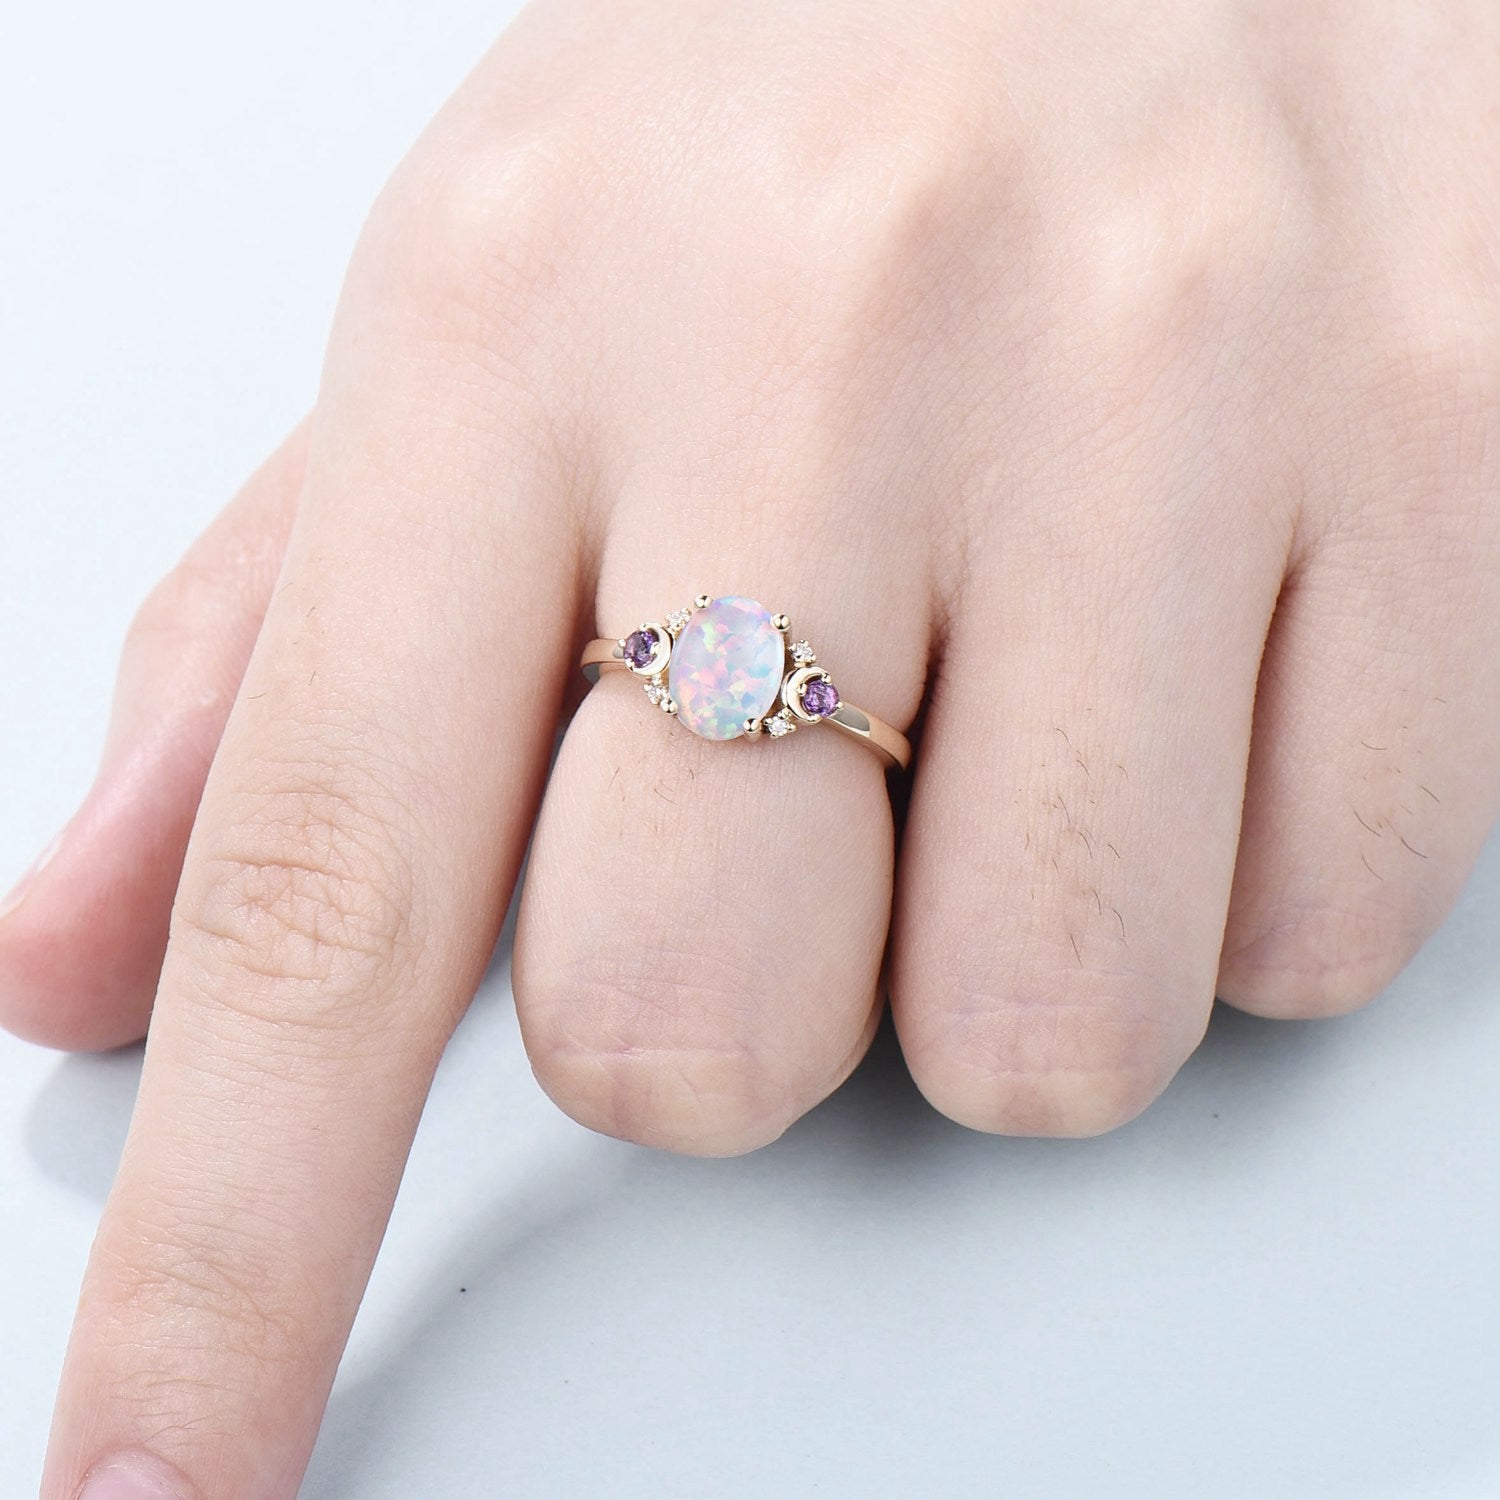 Vintage Opal Engagement Ring Rose Gold Unique Nature Inspired Moon Amethyst Ring Unique Alternative October birthstone Wedding Ring Women - PENFINE